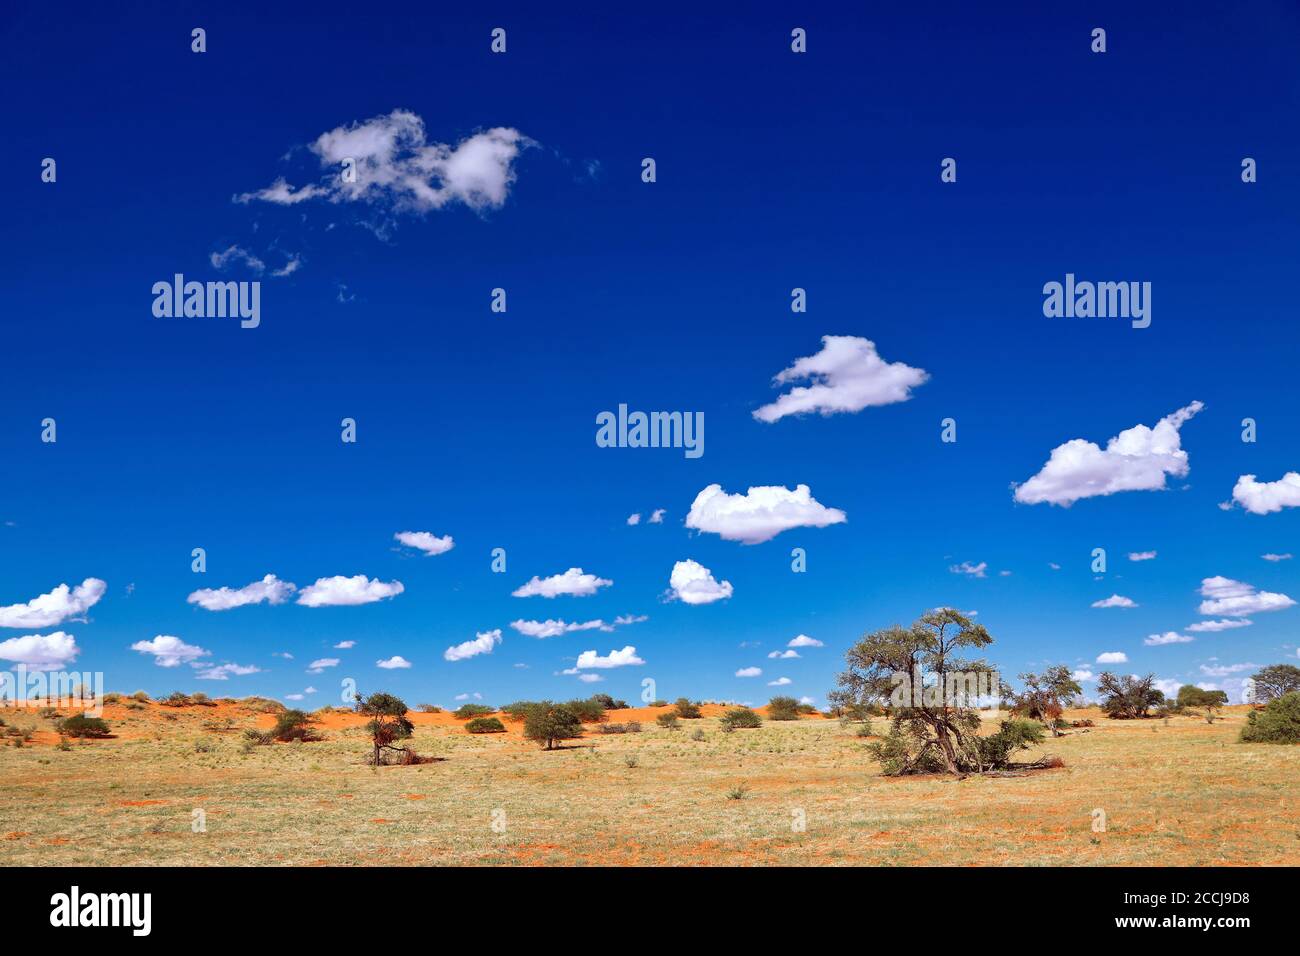 Landscape at Kgalagadi Transfrontier National Park, South Africa Stock Photo